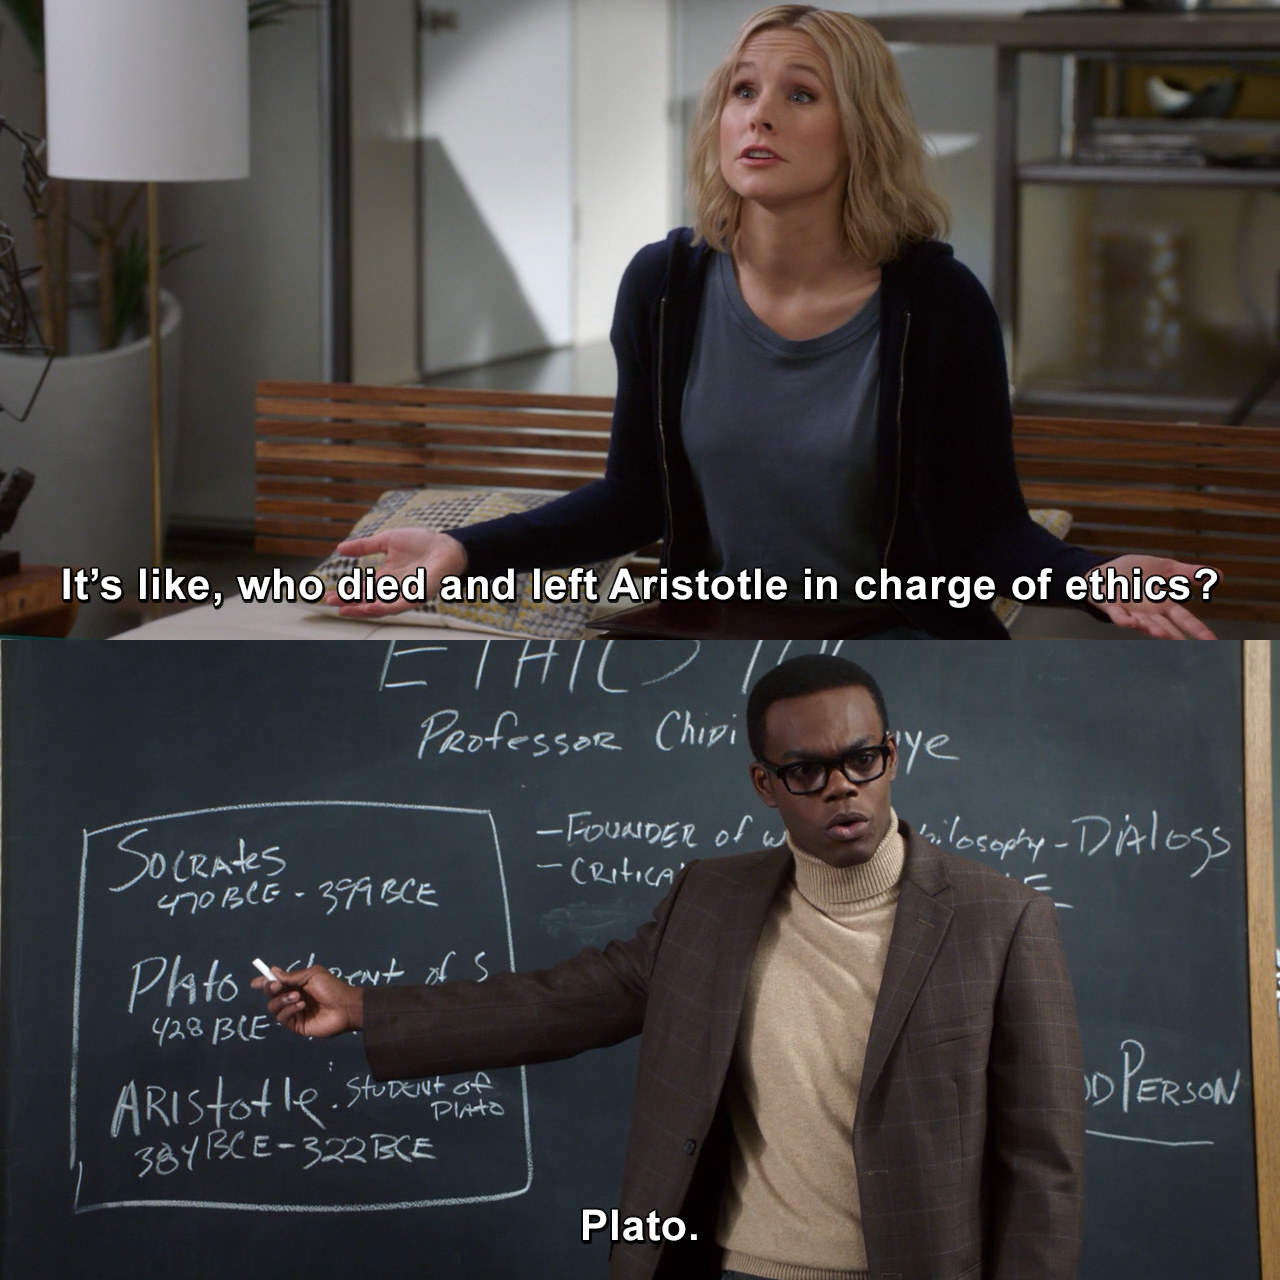 Eleanor: &quot;Who died and left Aristotle in charge of ethics?&quot; Chidi: &quot;Plato.&quot;